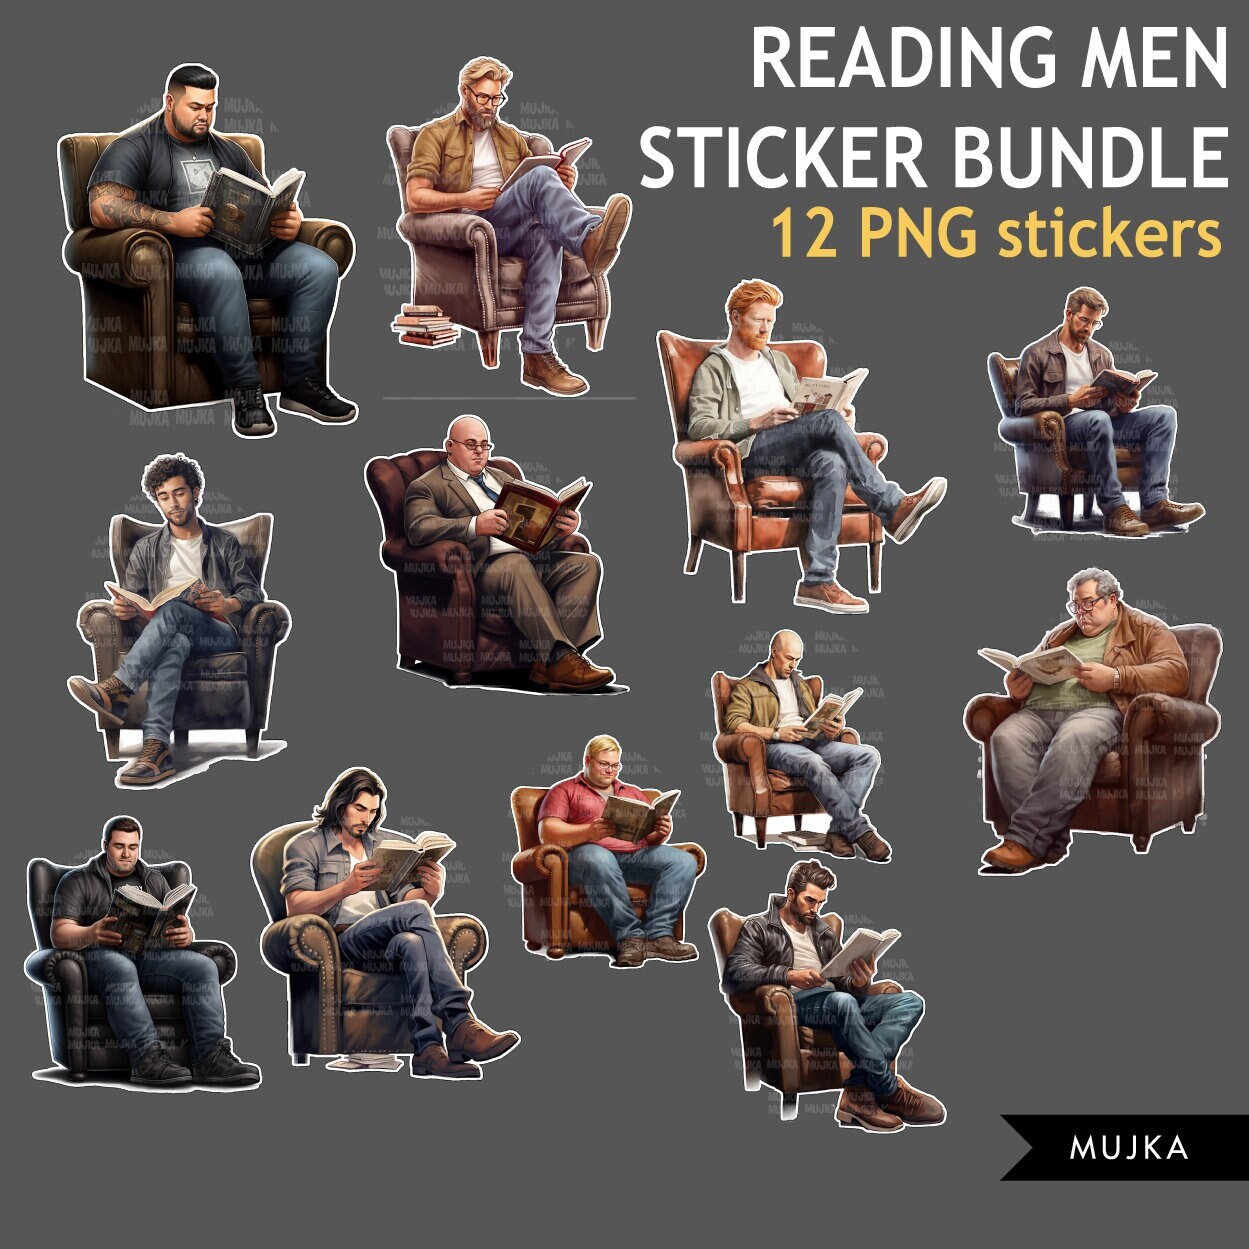 Fathers Day Bundle PNG, Bookworm png, Man digital Stickers, reading man clipart Bundle, sublimation designs, dad gifts, dad stickers